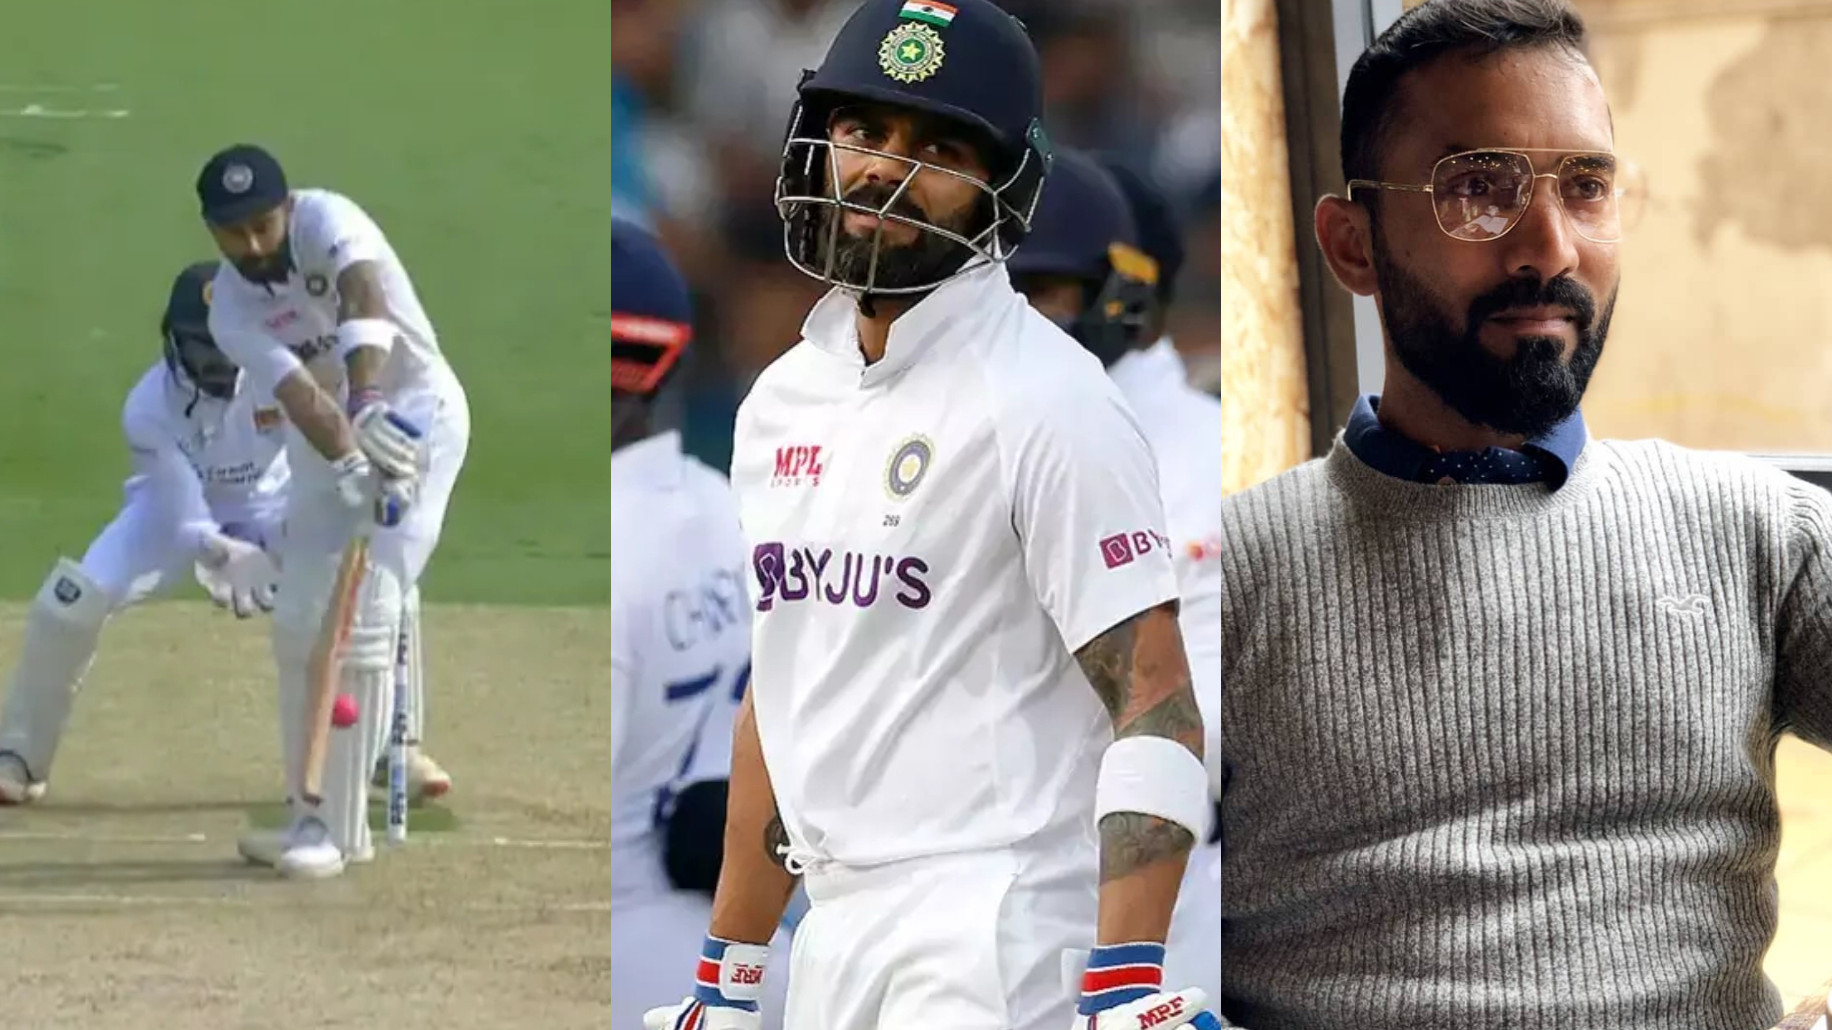 IND v SL 2022: 'This strategy causes more trouble' - Dinesh Karthik surprised by Virat Kohli's approach against spin